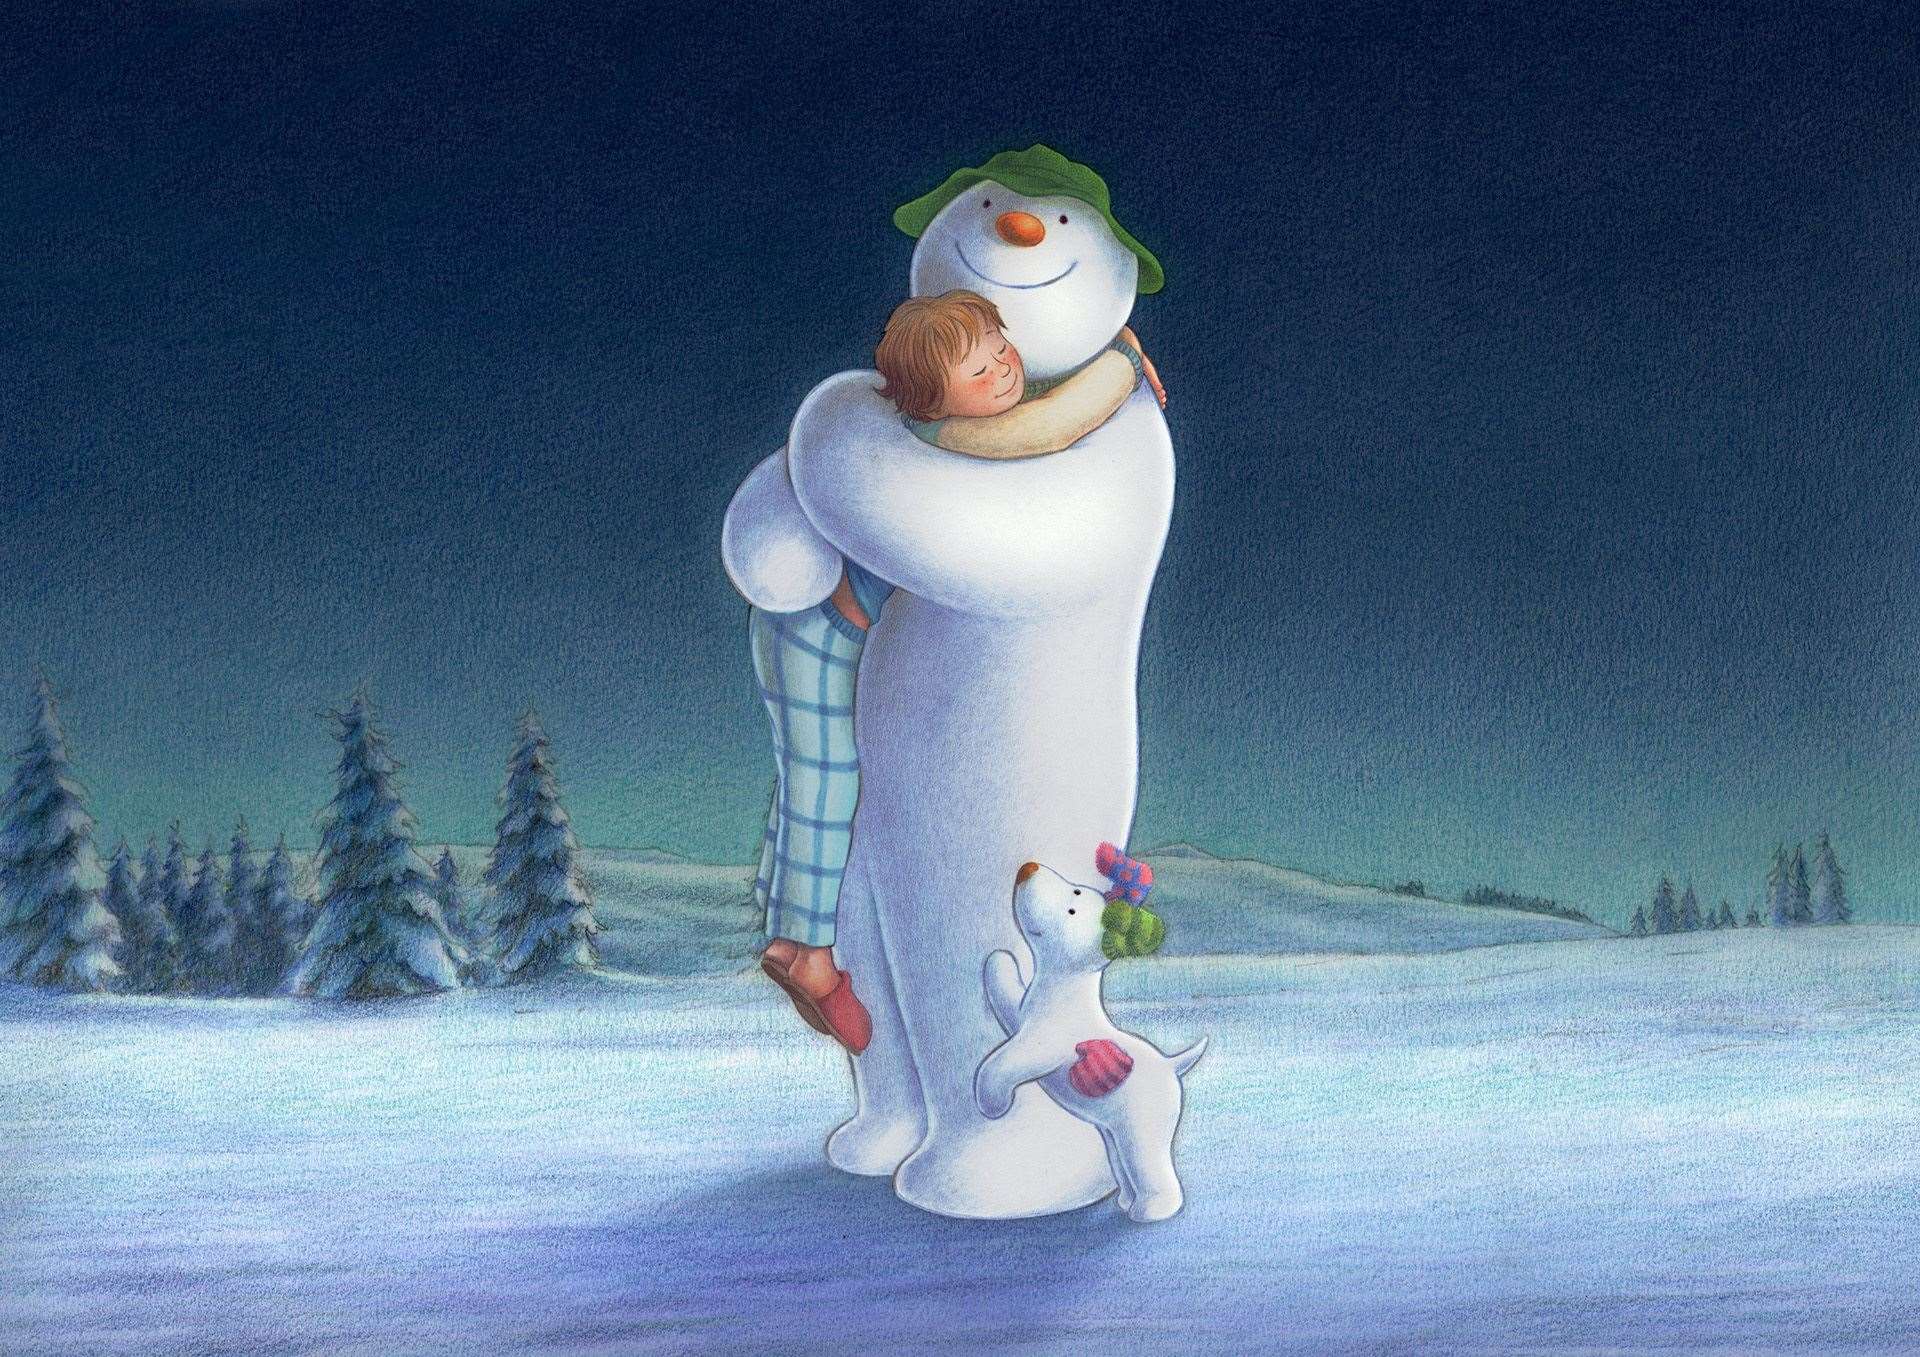 The Snowman and The Snowdog was first released in 2012